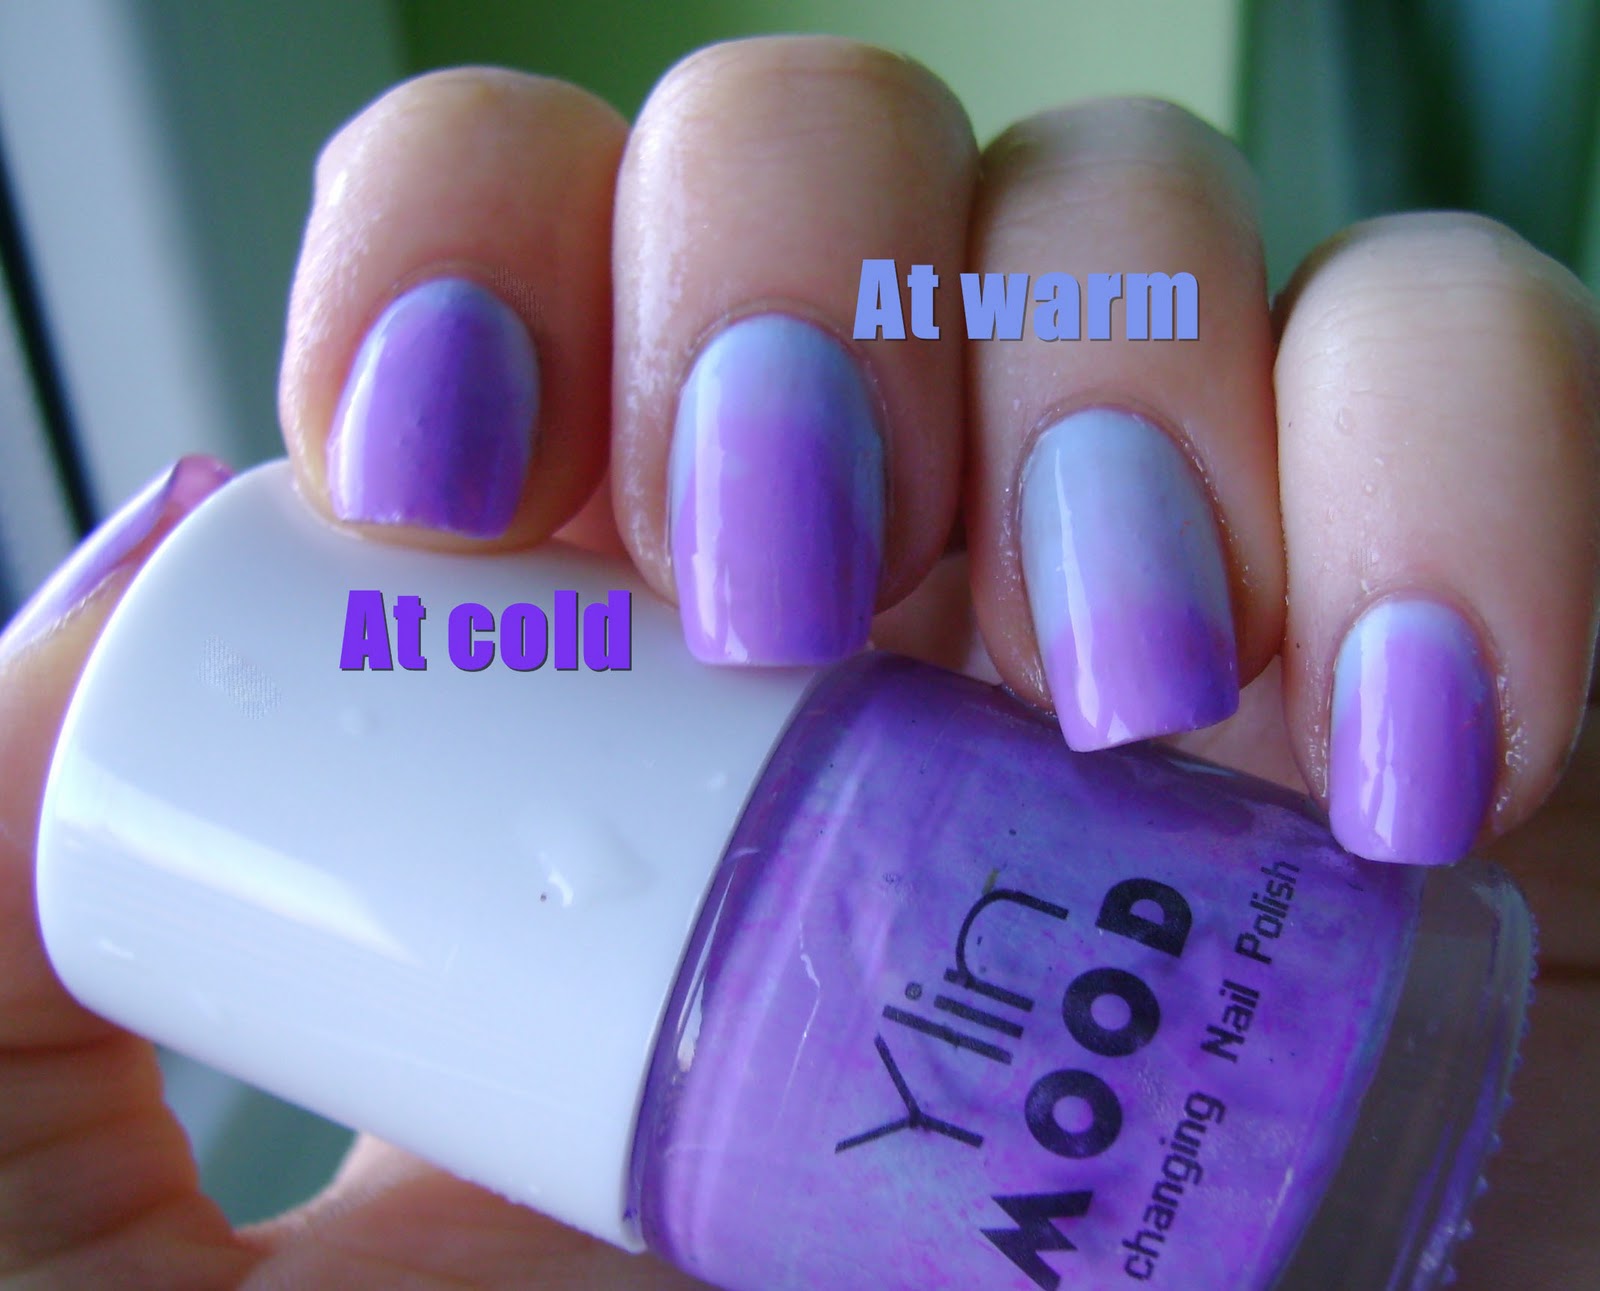 3. Claire's Mood Color Changing Nail Polish - wide 8